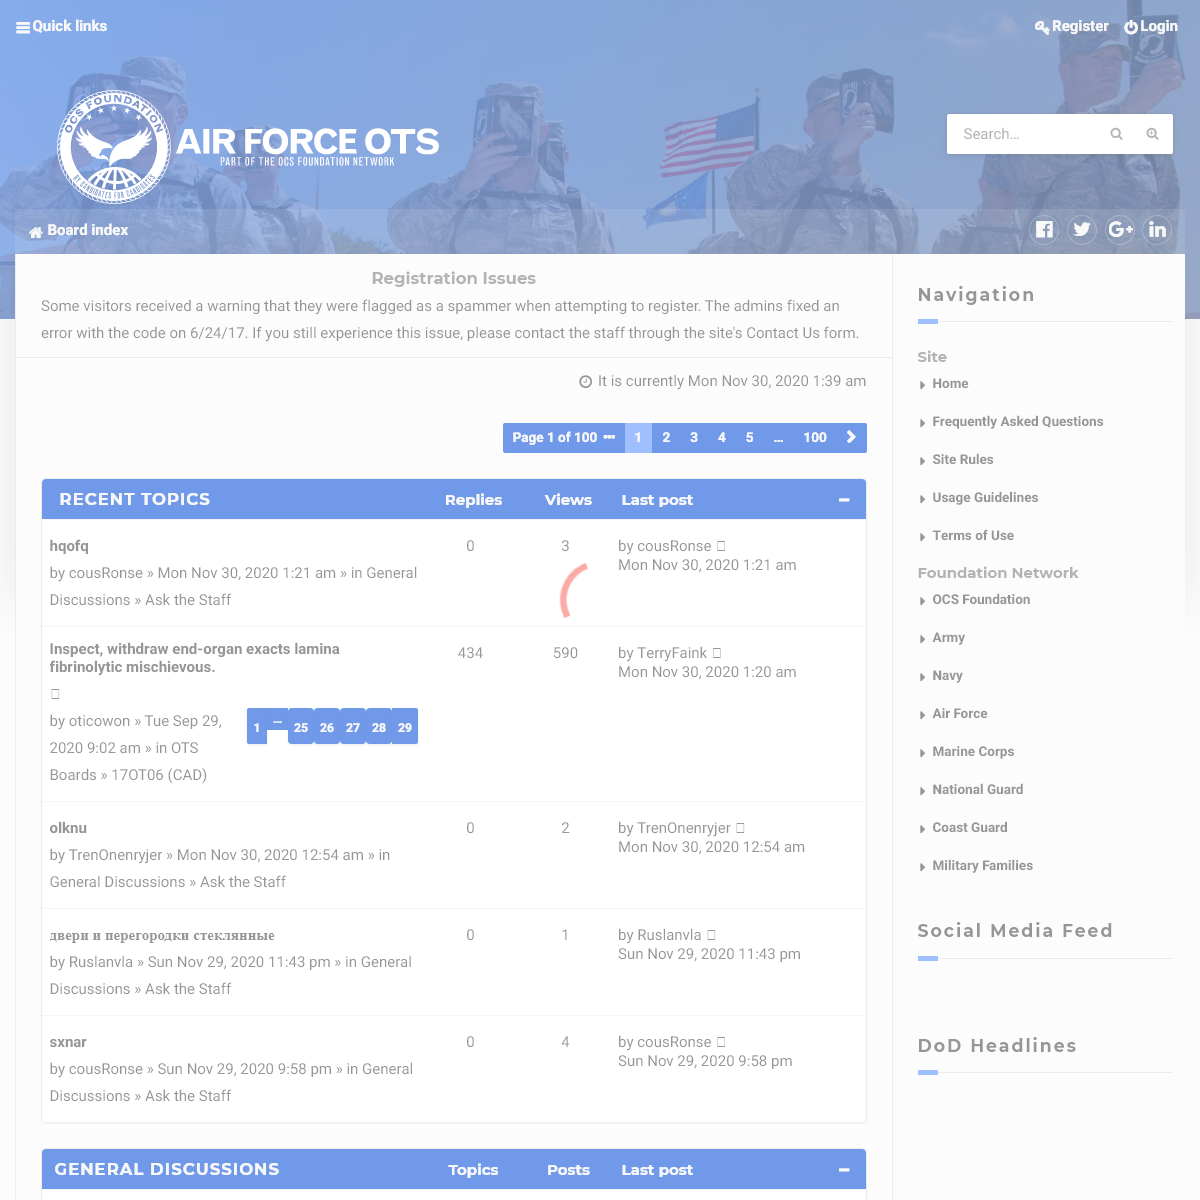 A complete backup of airforceots.com